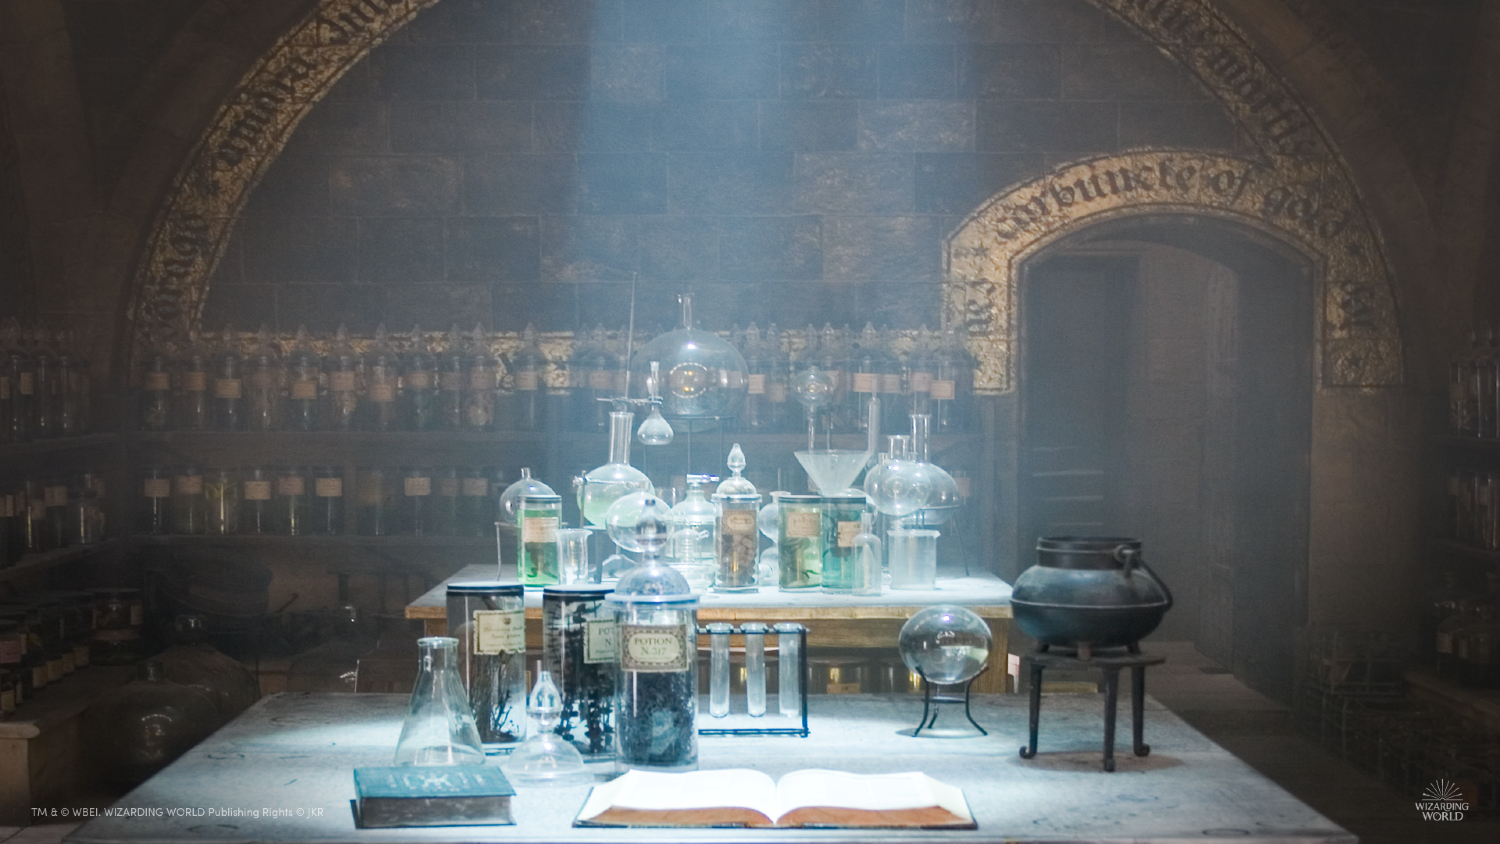 Potions galore in the Potions class background